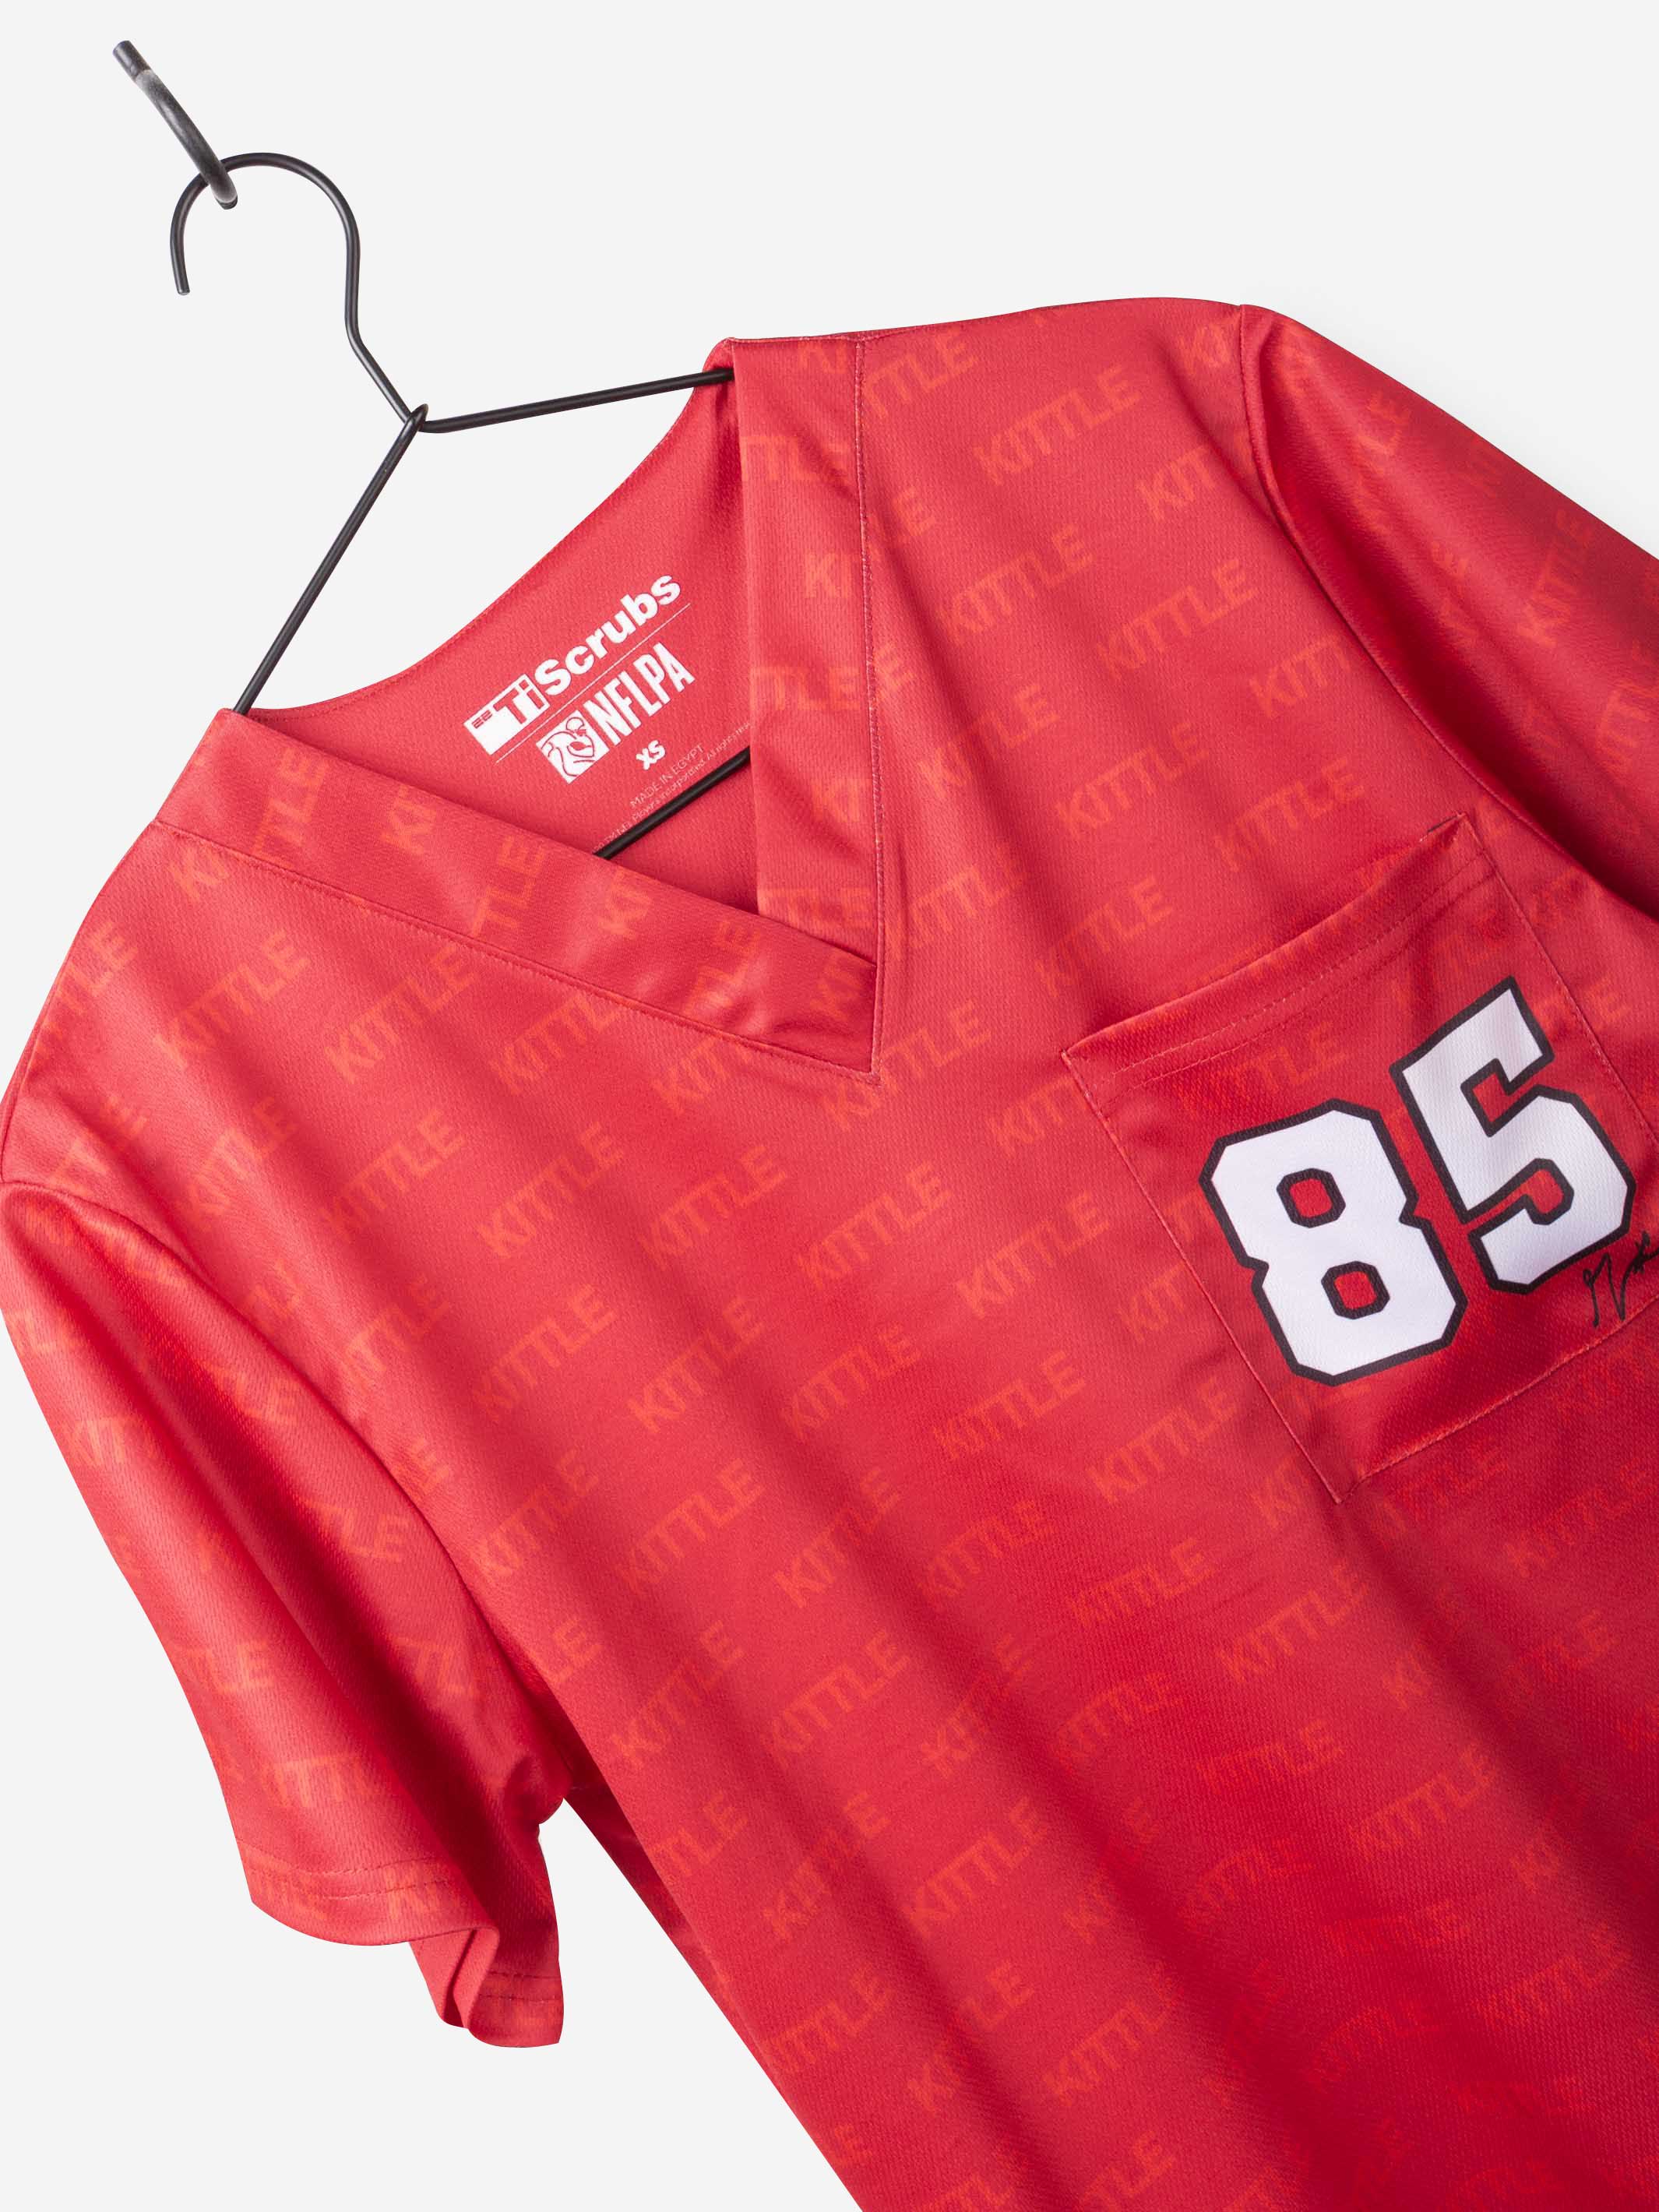 Men's George Kittle Scrub Top Jersey in red